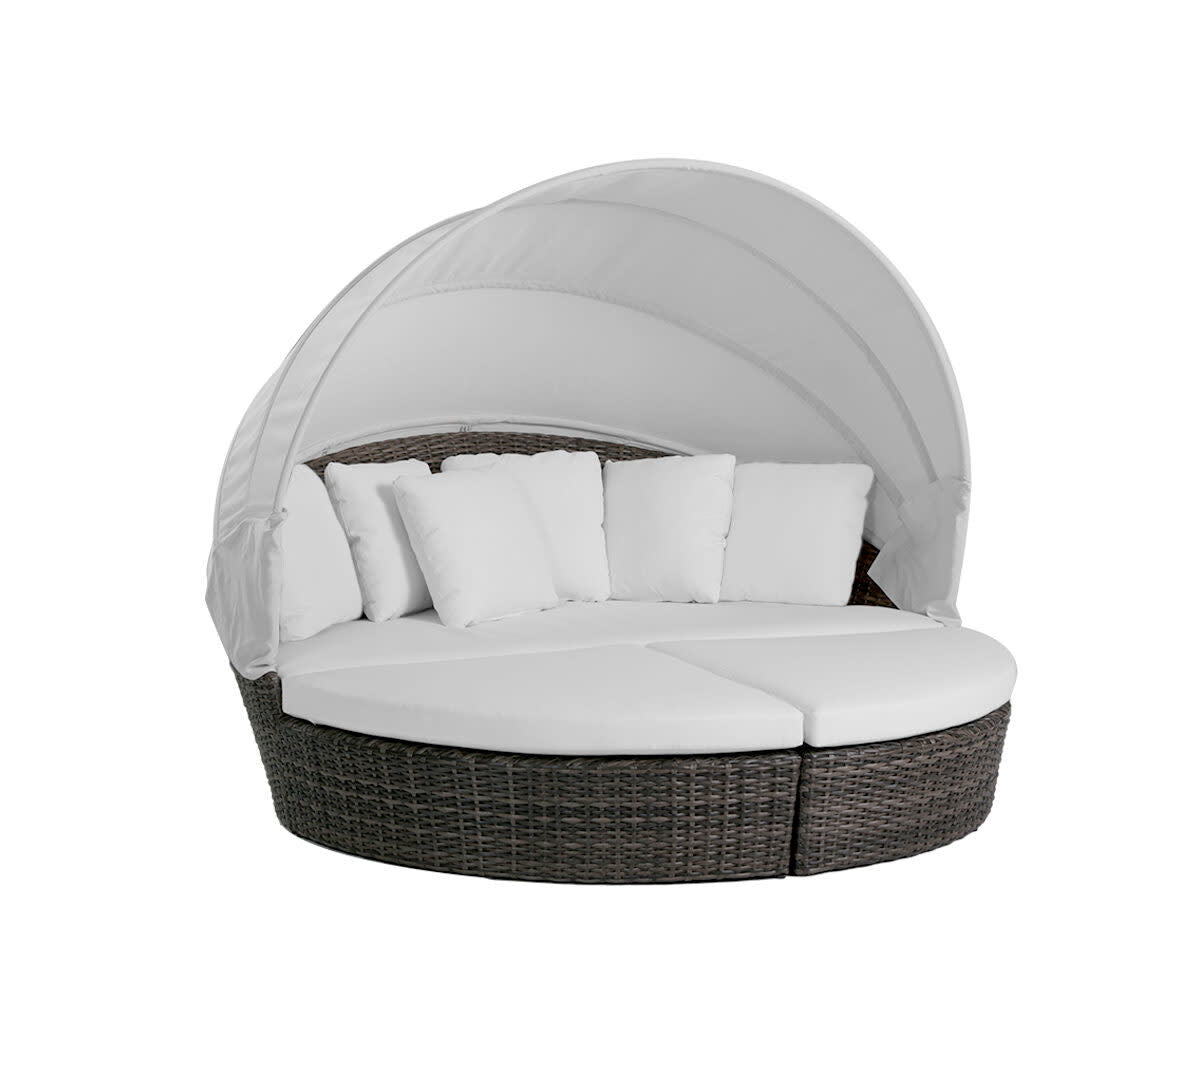 Coral Gables Round Daybed w/Sunbrella Canopy